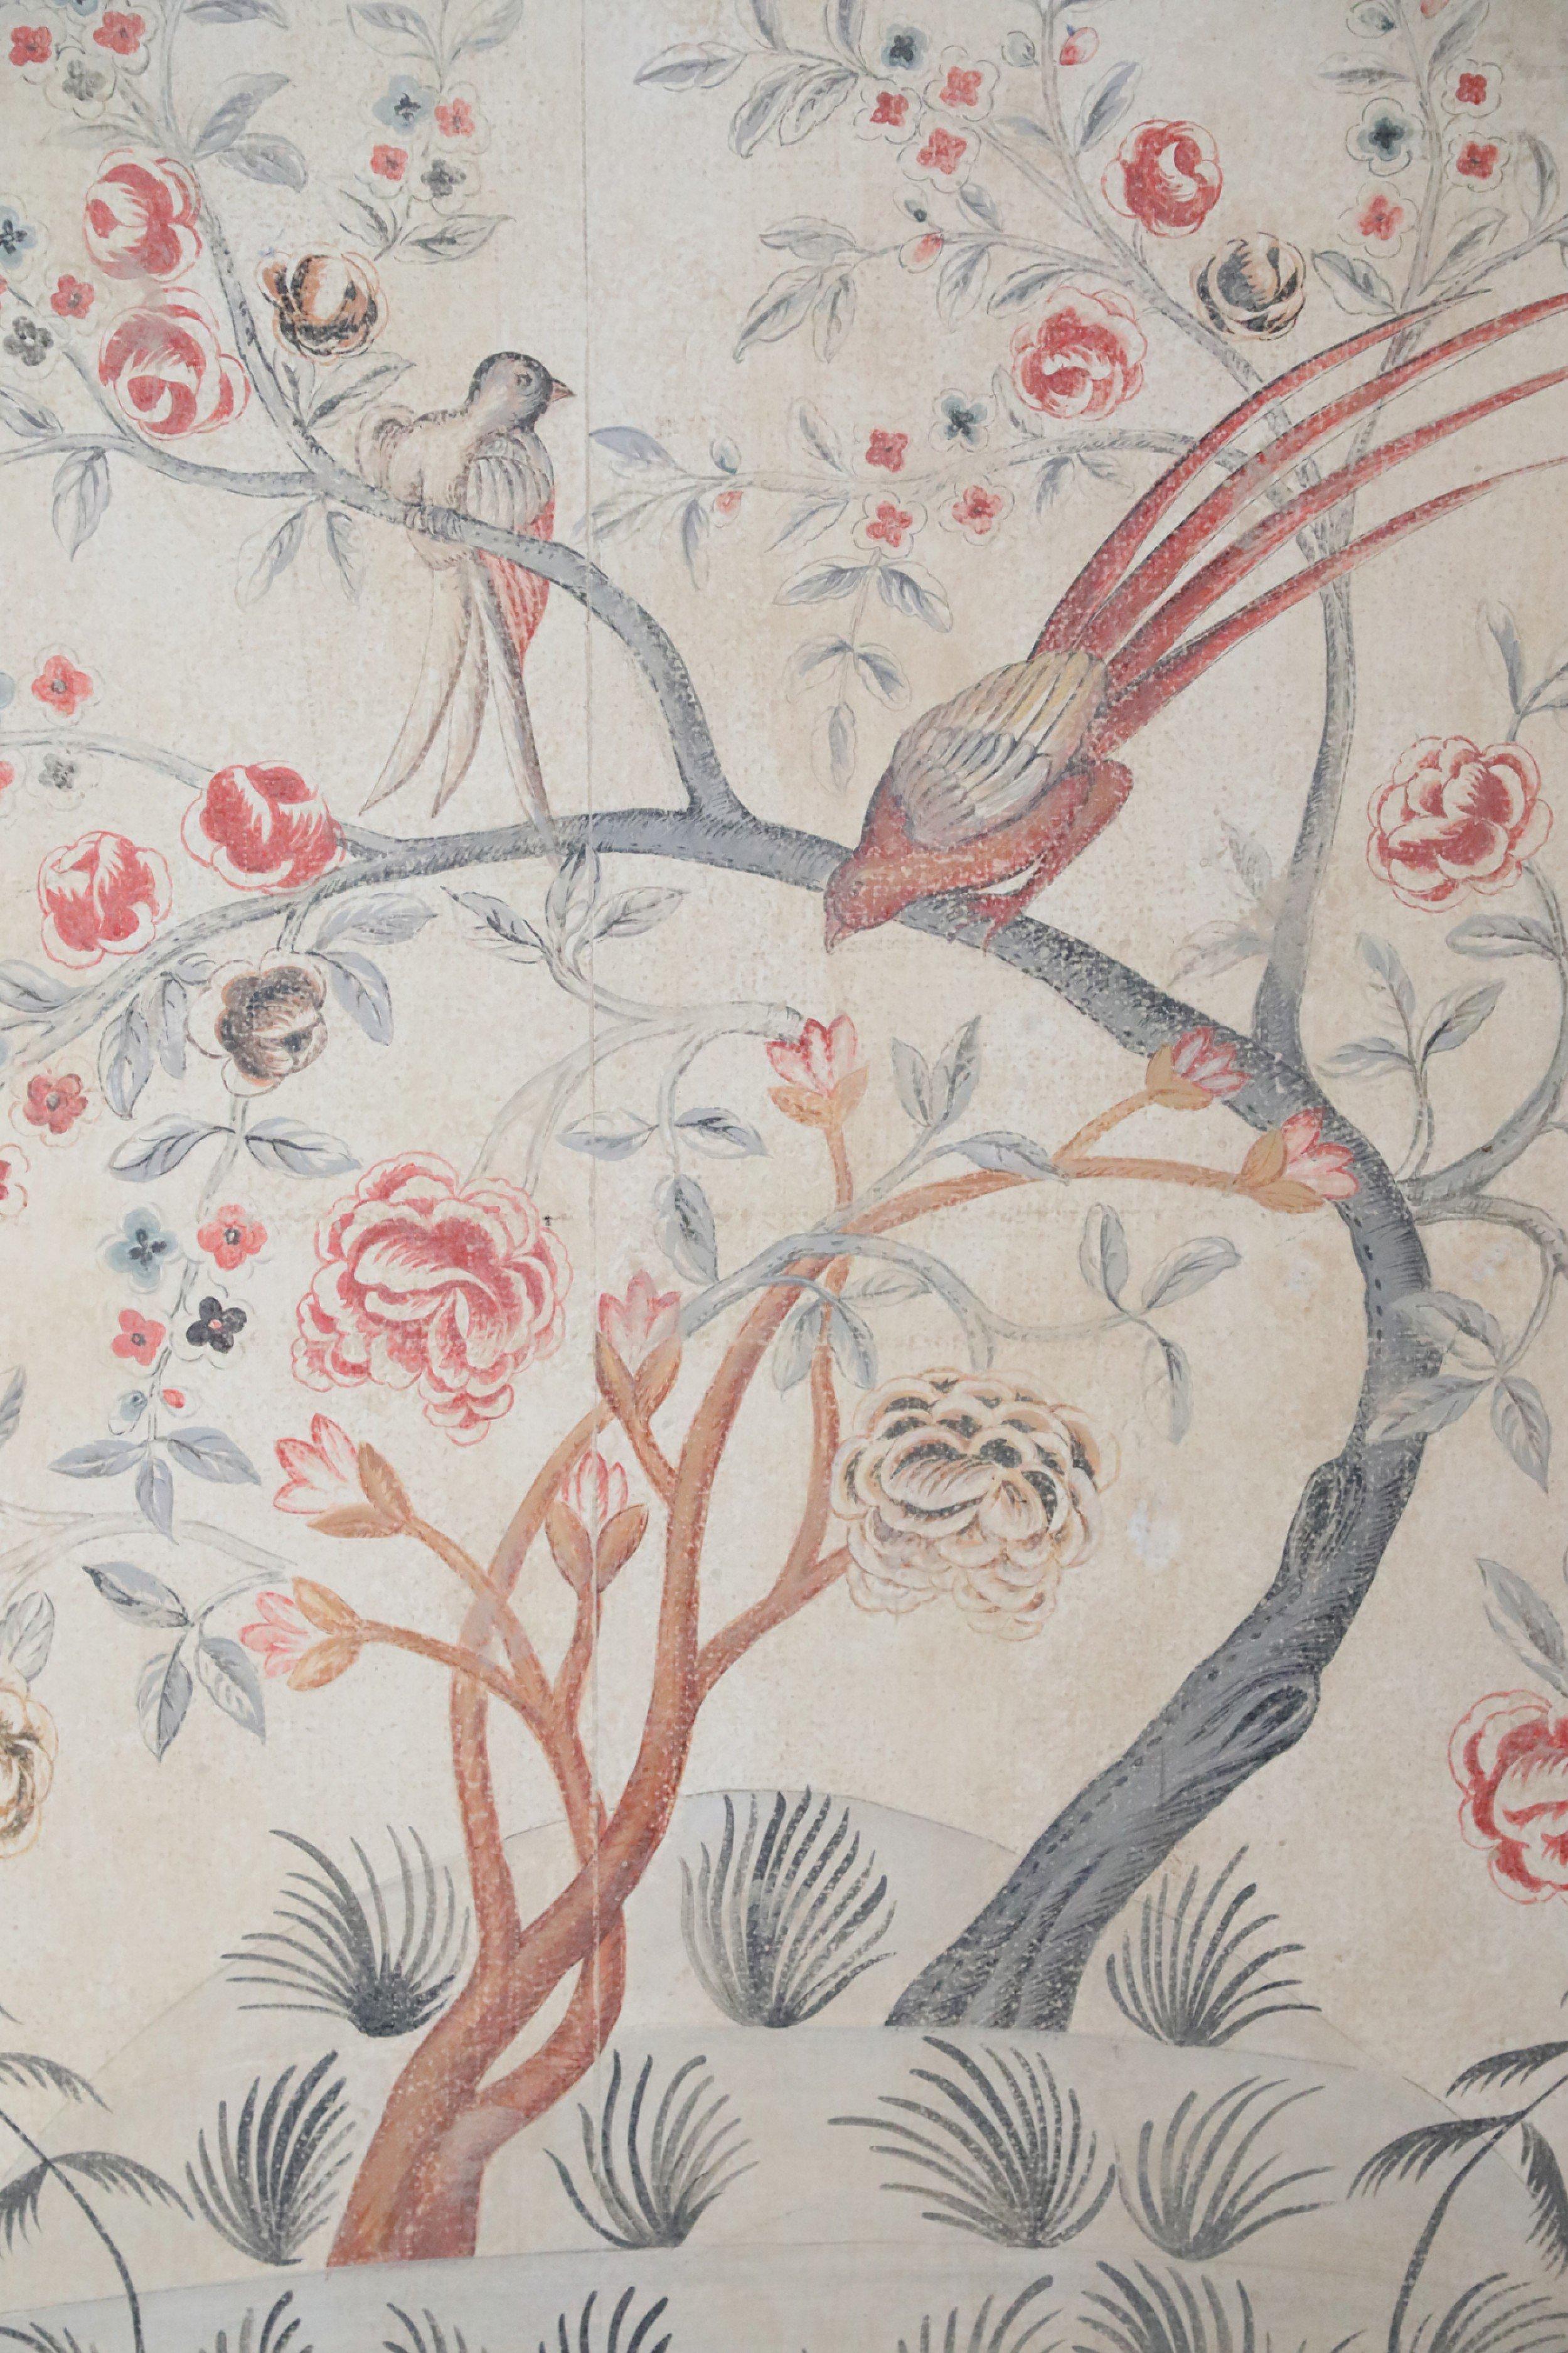 Vintage (20th century) panel with a ground that mimicks antique parchment and a painting of blue-grey and teracotta-colored undulating trees blooming with florals and housing two birds, one of which is displaying dramatic red feathers. The painting